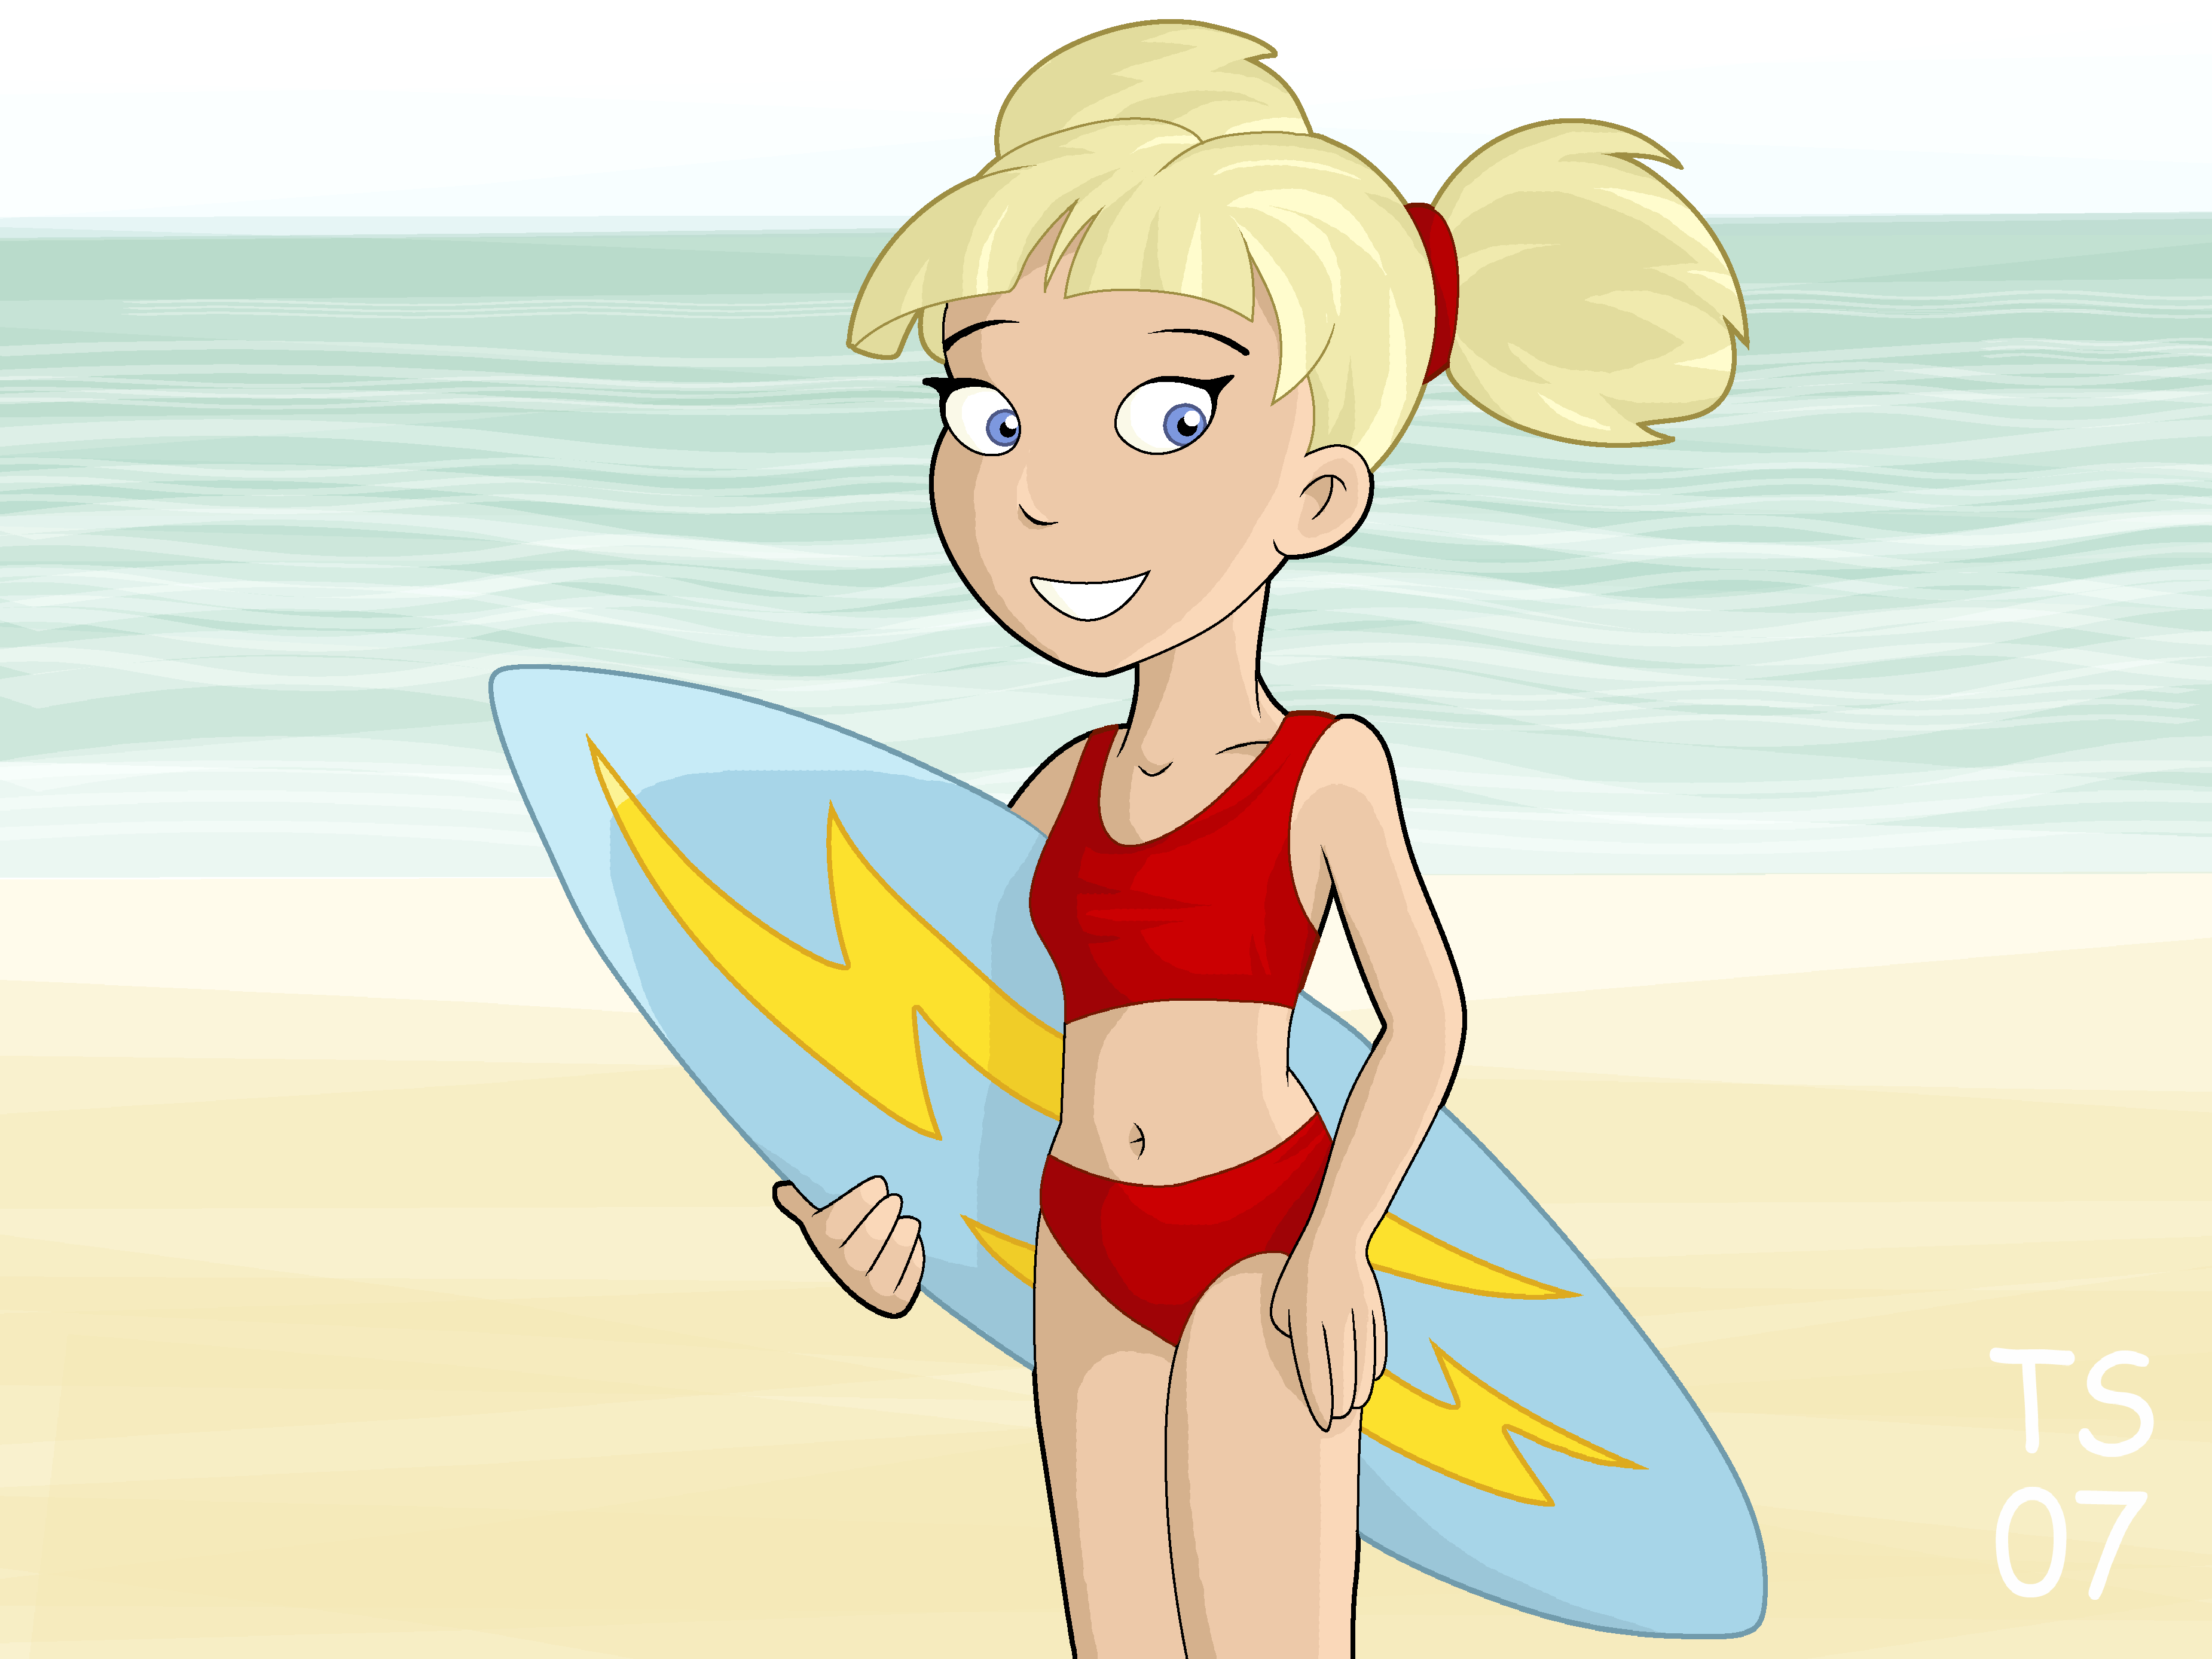 Surfer_Babe_Penny.png.